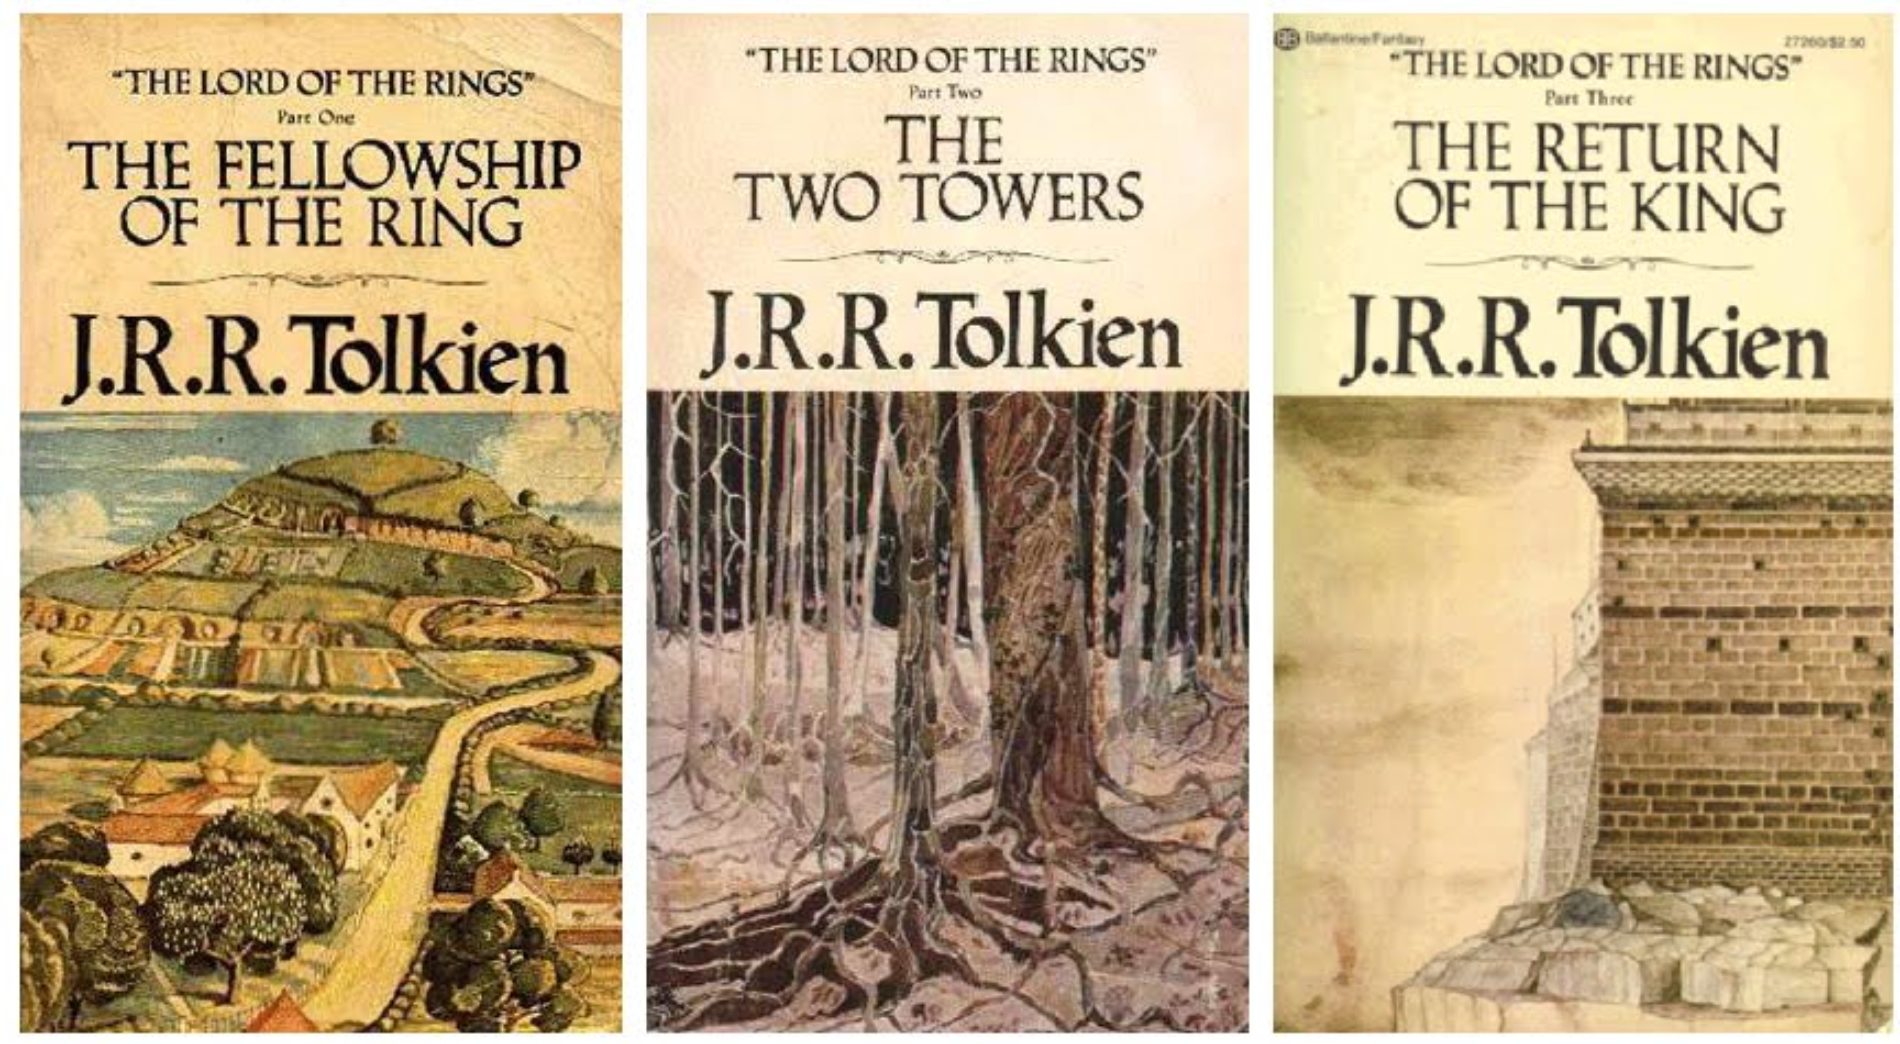 LOTR_book_covers-1900x1044_c